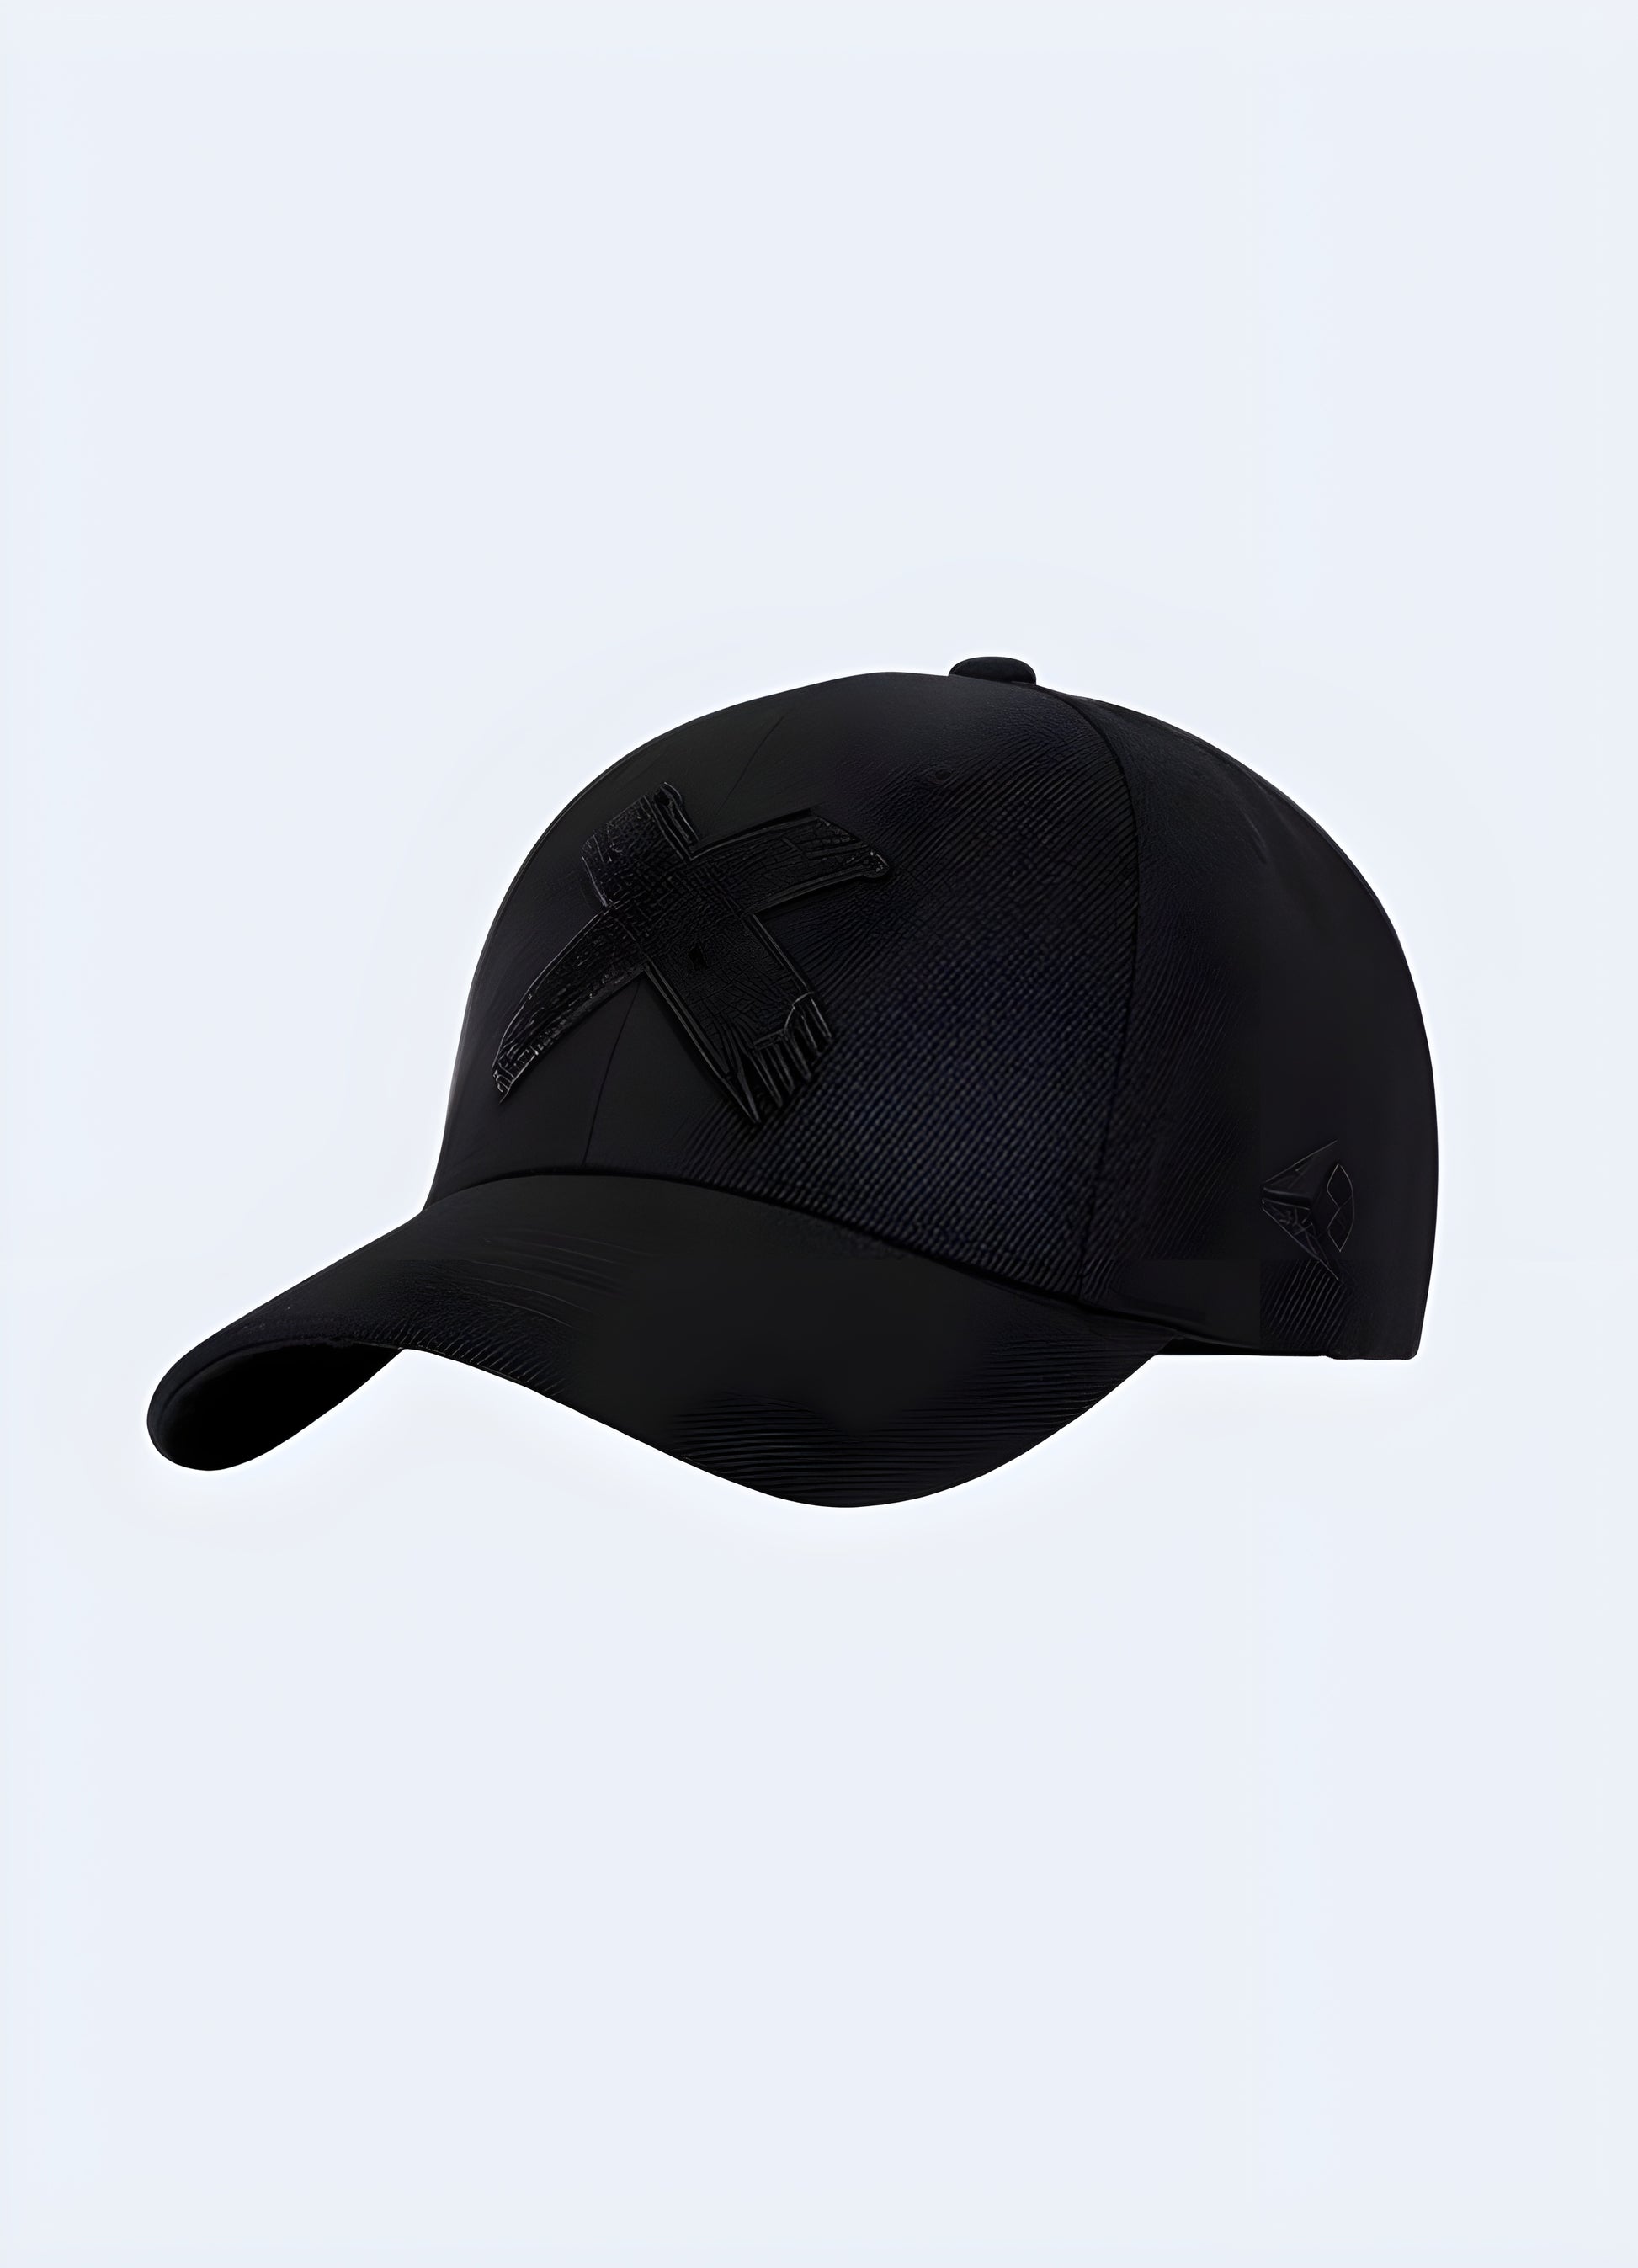 Stand out from the crowd with this unique cross cap, available in multiple colors.